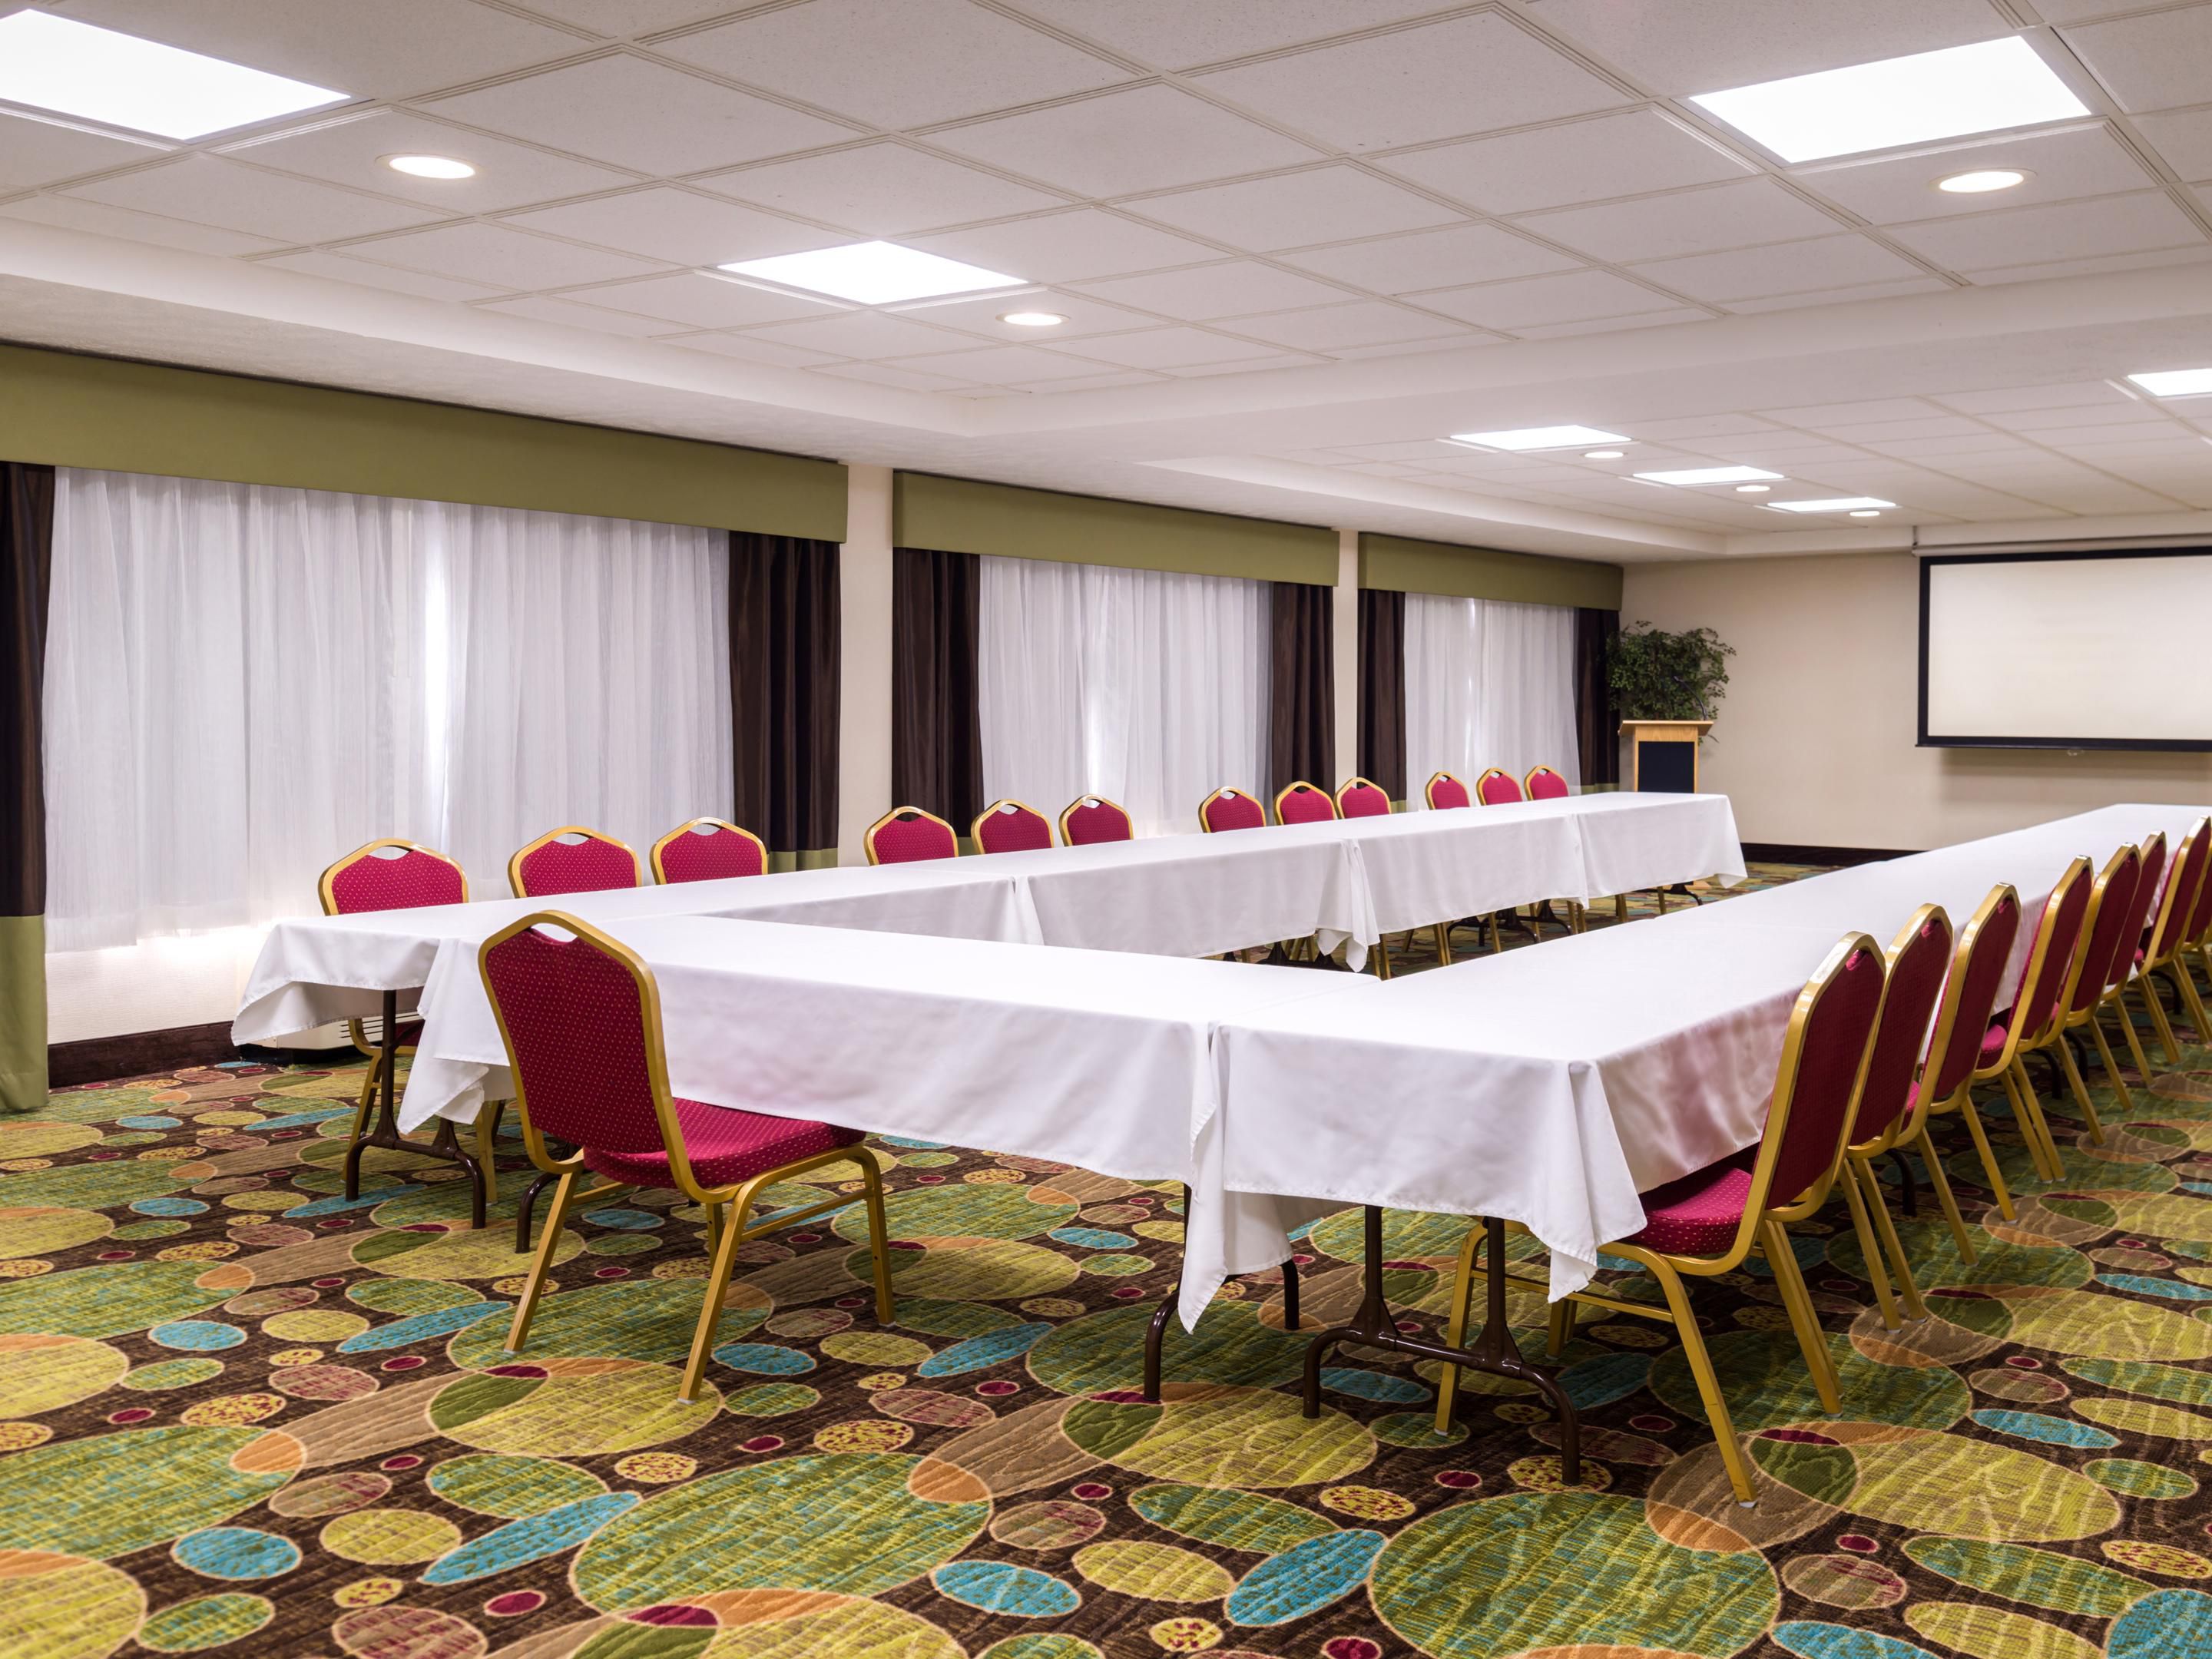 With nearly 2,400 square feet of meeting space we can more than accommodate your next meeting, function or event. Our largest meeting space has a capacity of up to 80. Call our sales department today to request a tour of our facilities or to book an event.